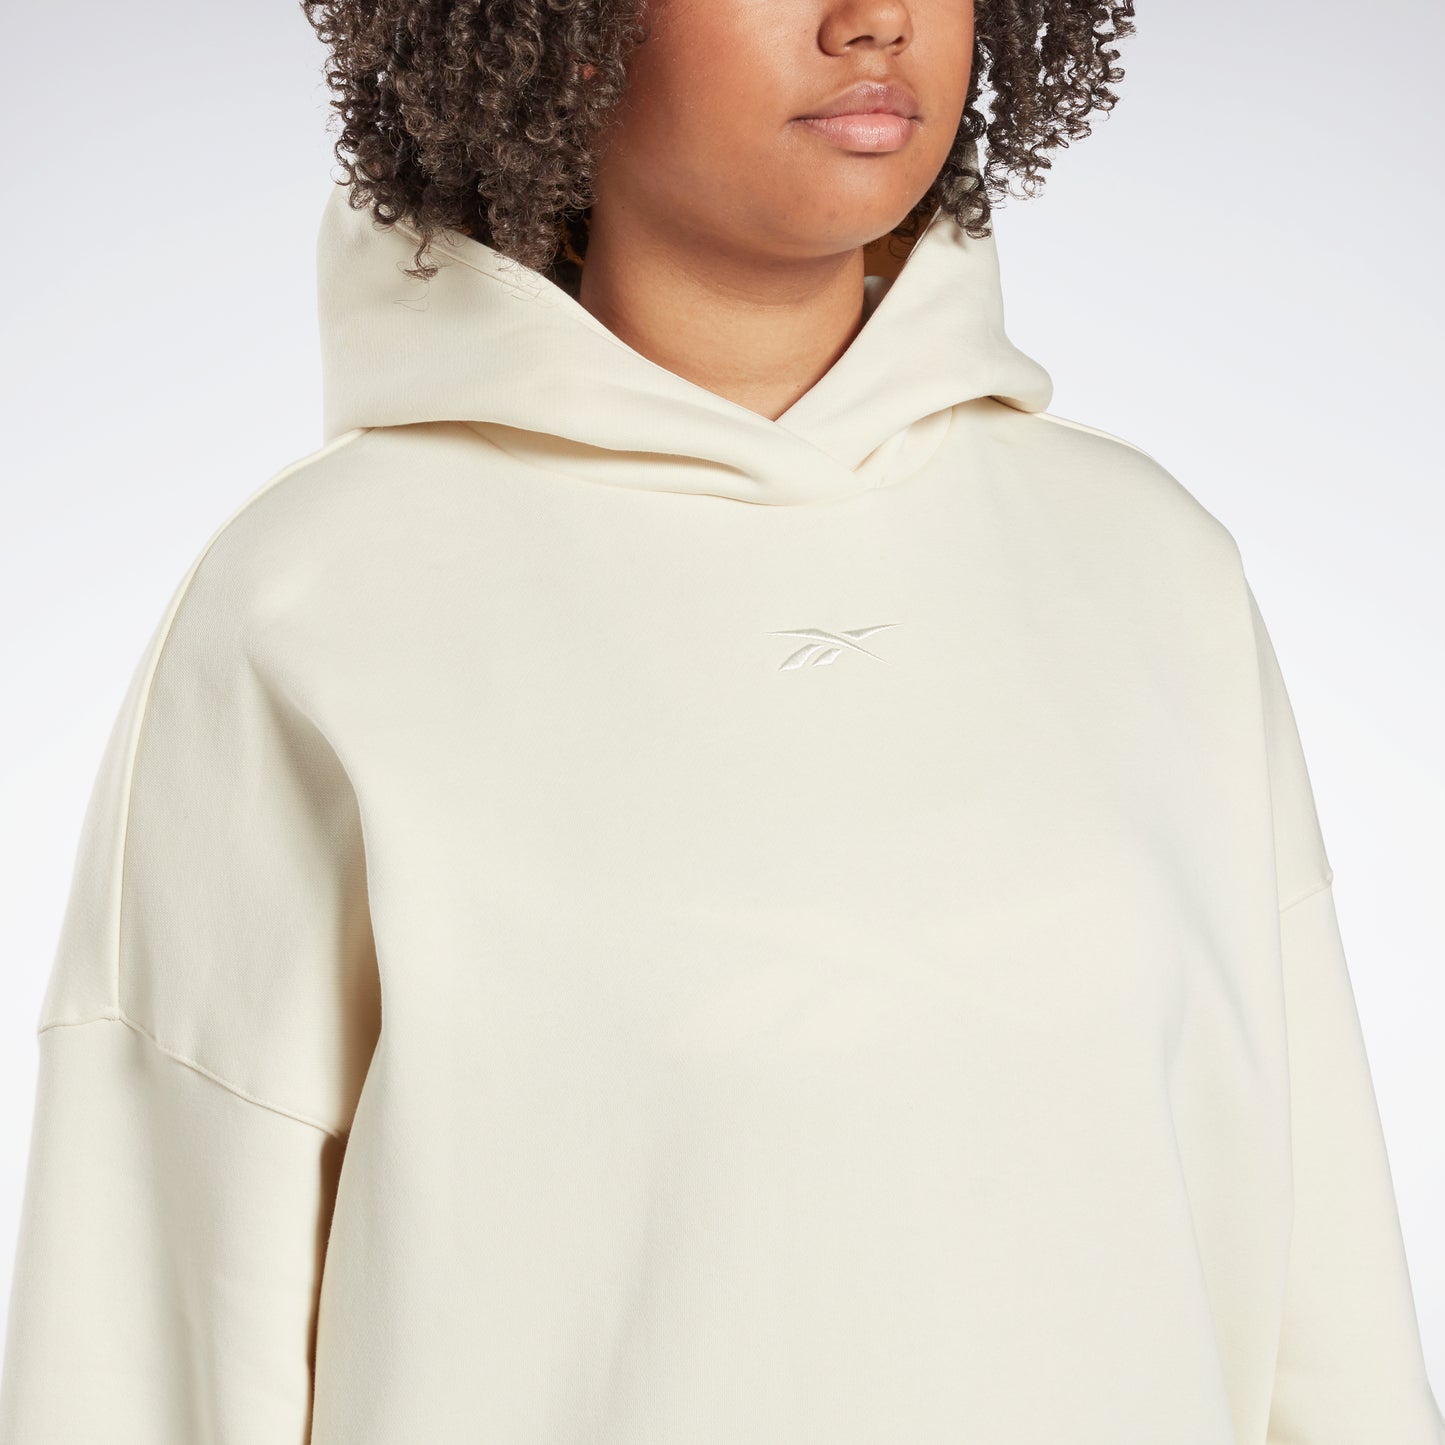 Reebok Apparel Women Studio Recycled Oversize Hoodie (Taille Plus) Clawht